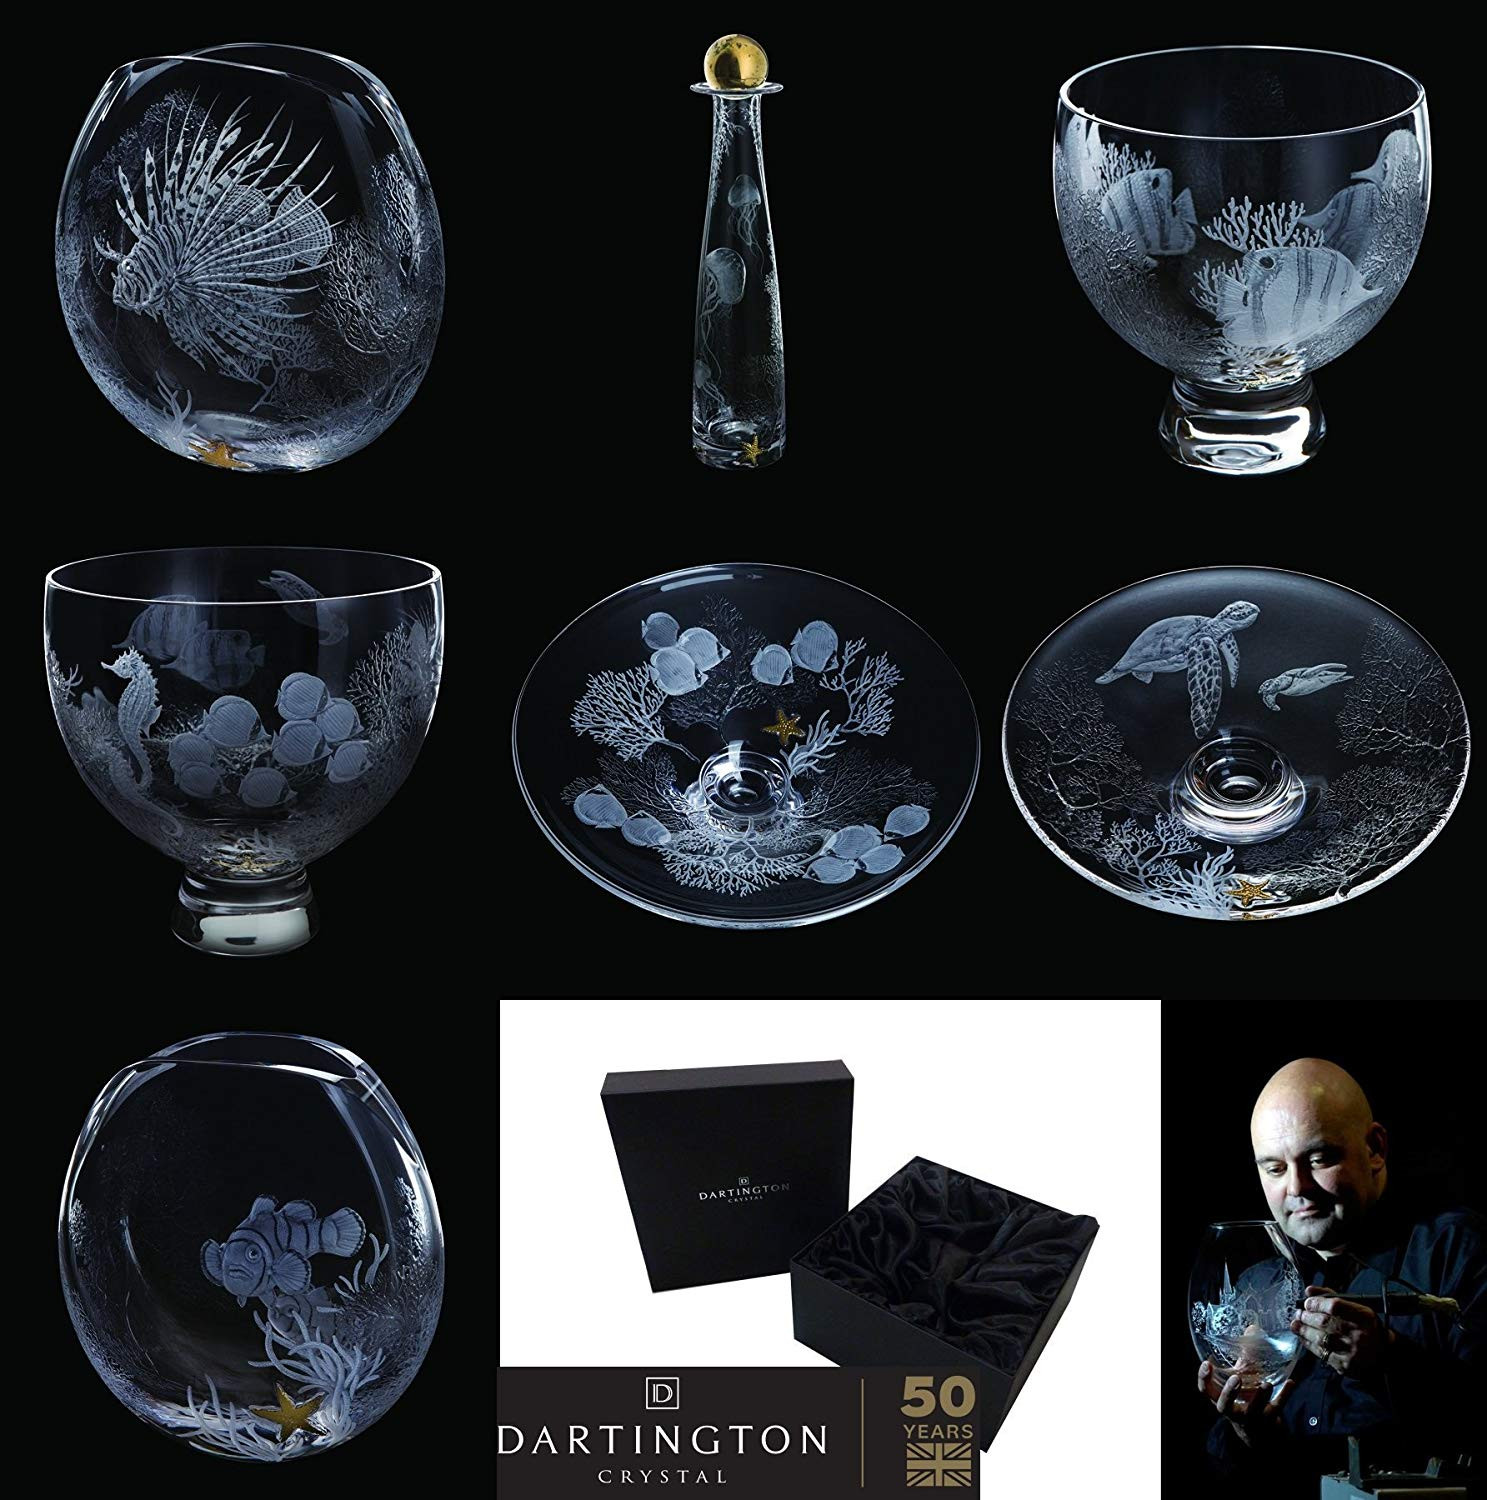 11 Best Big Wine Glass Vase 2024 free download big wine glass vase of dartington crystal tall large seahorse glass vase wedding home party within master engraver nick davey has used the tropical undersea world as the inspiration for this